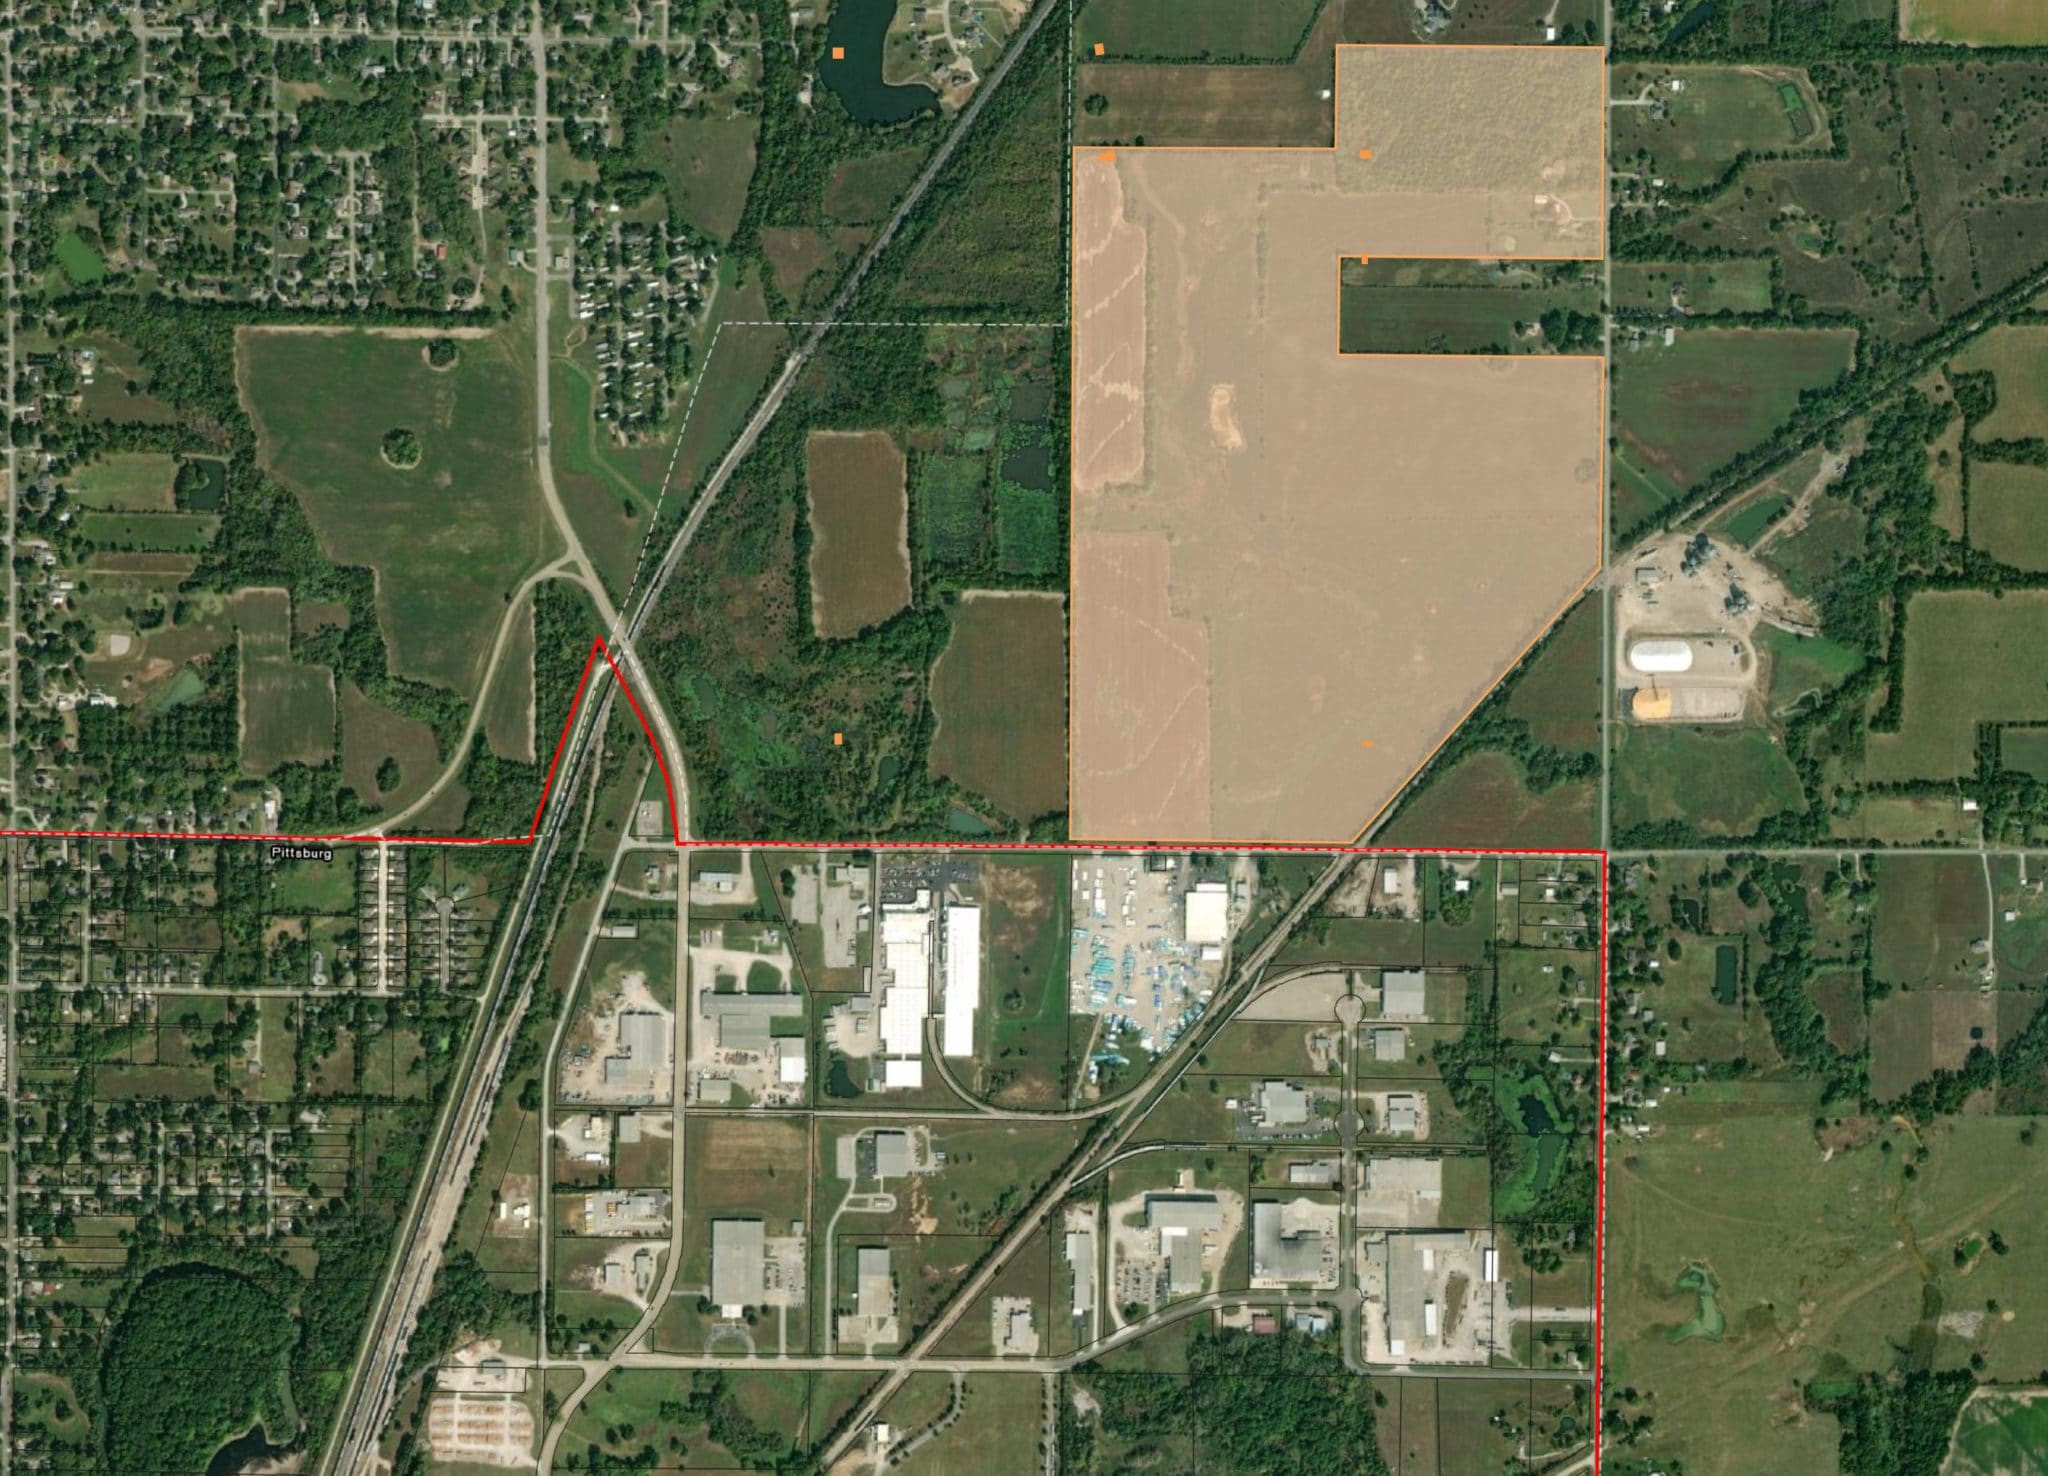 City of Pittsburg expands north industrial park